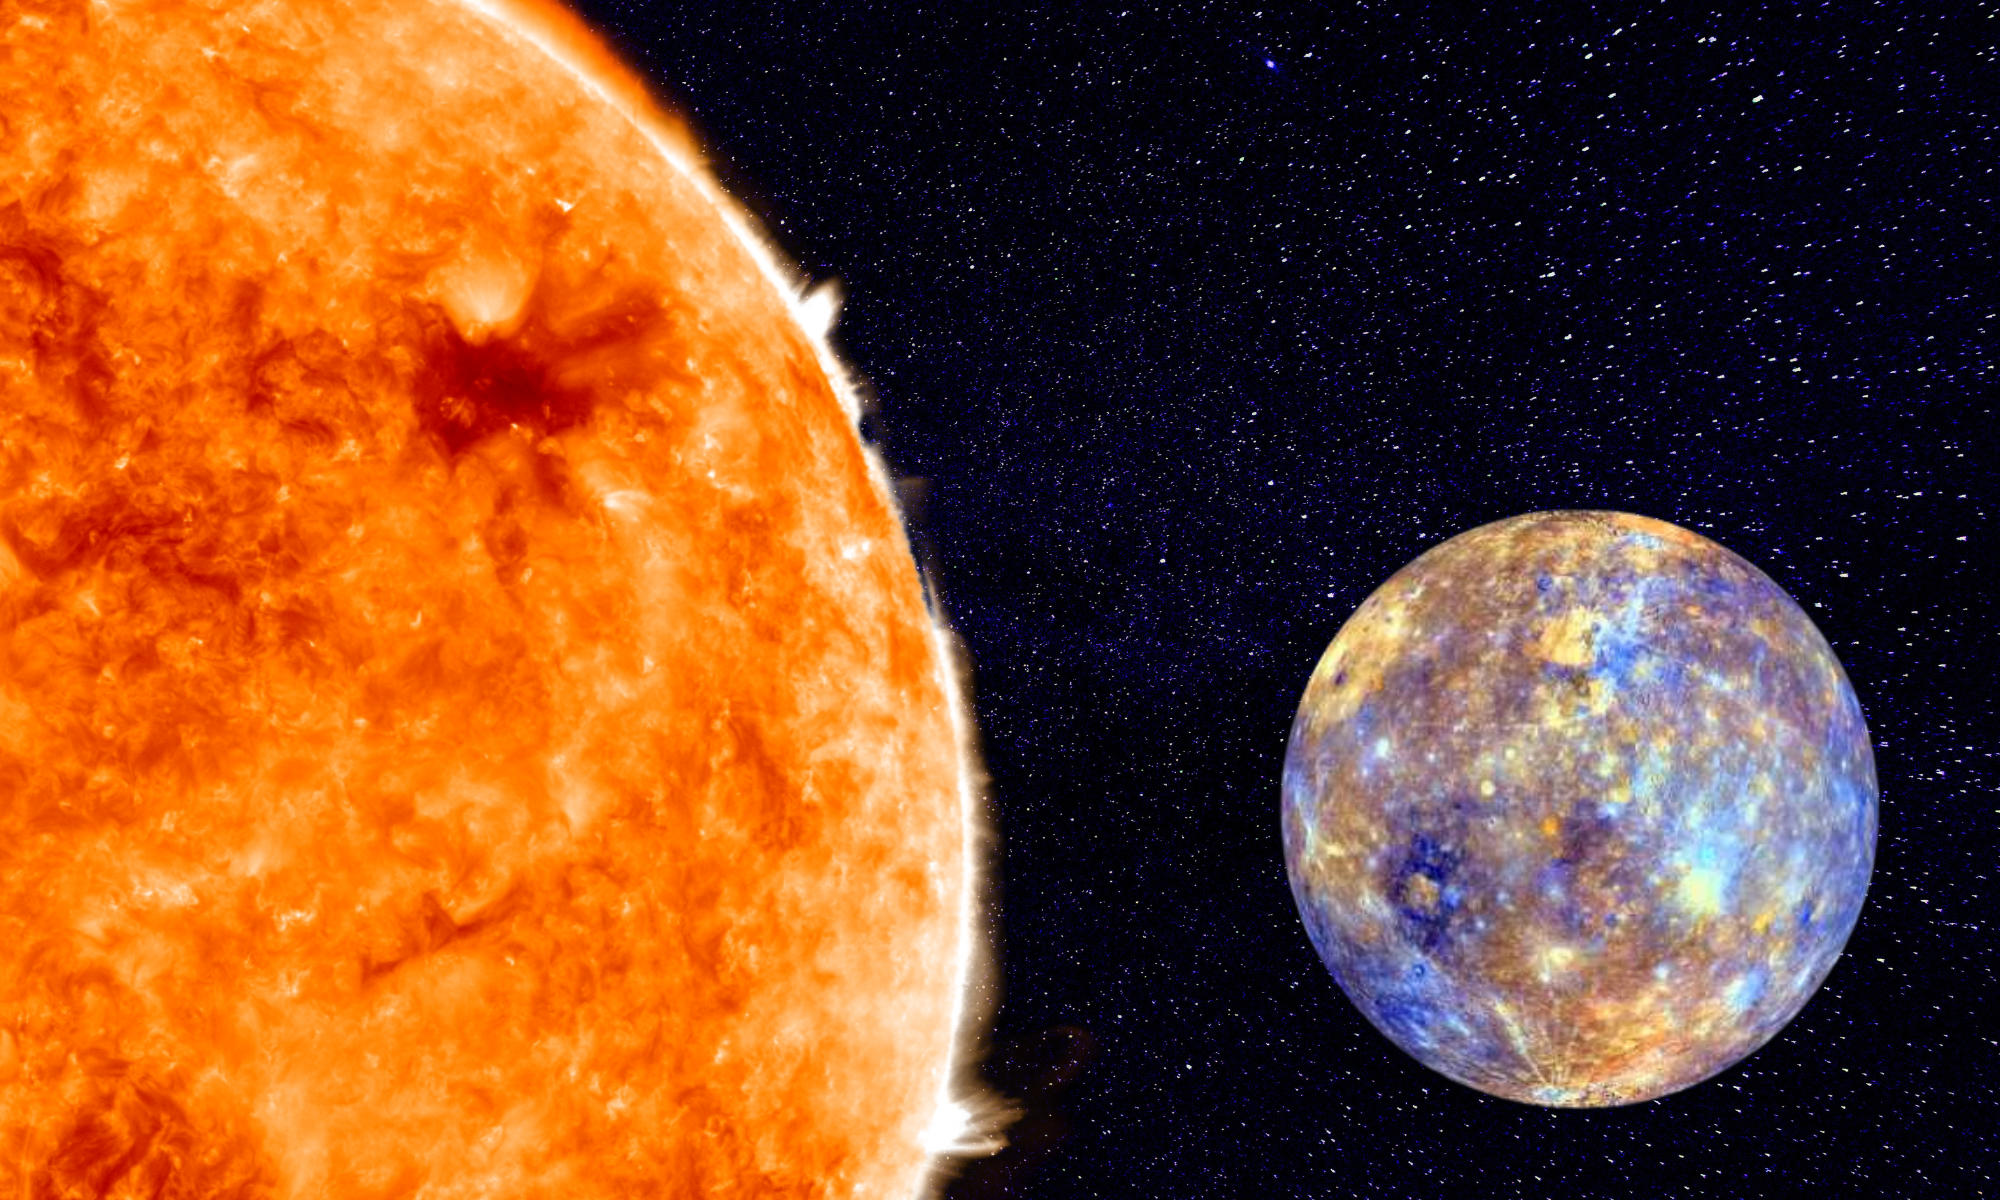 As the closest planet to the Sun, Mercury can be difficult to spot hidden in the glare of the star.